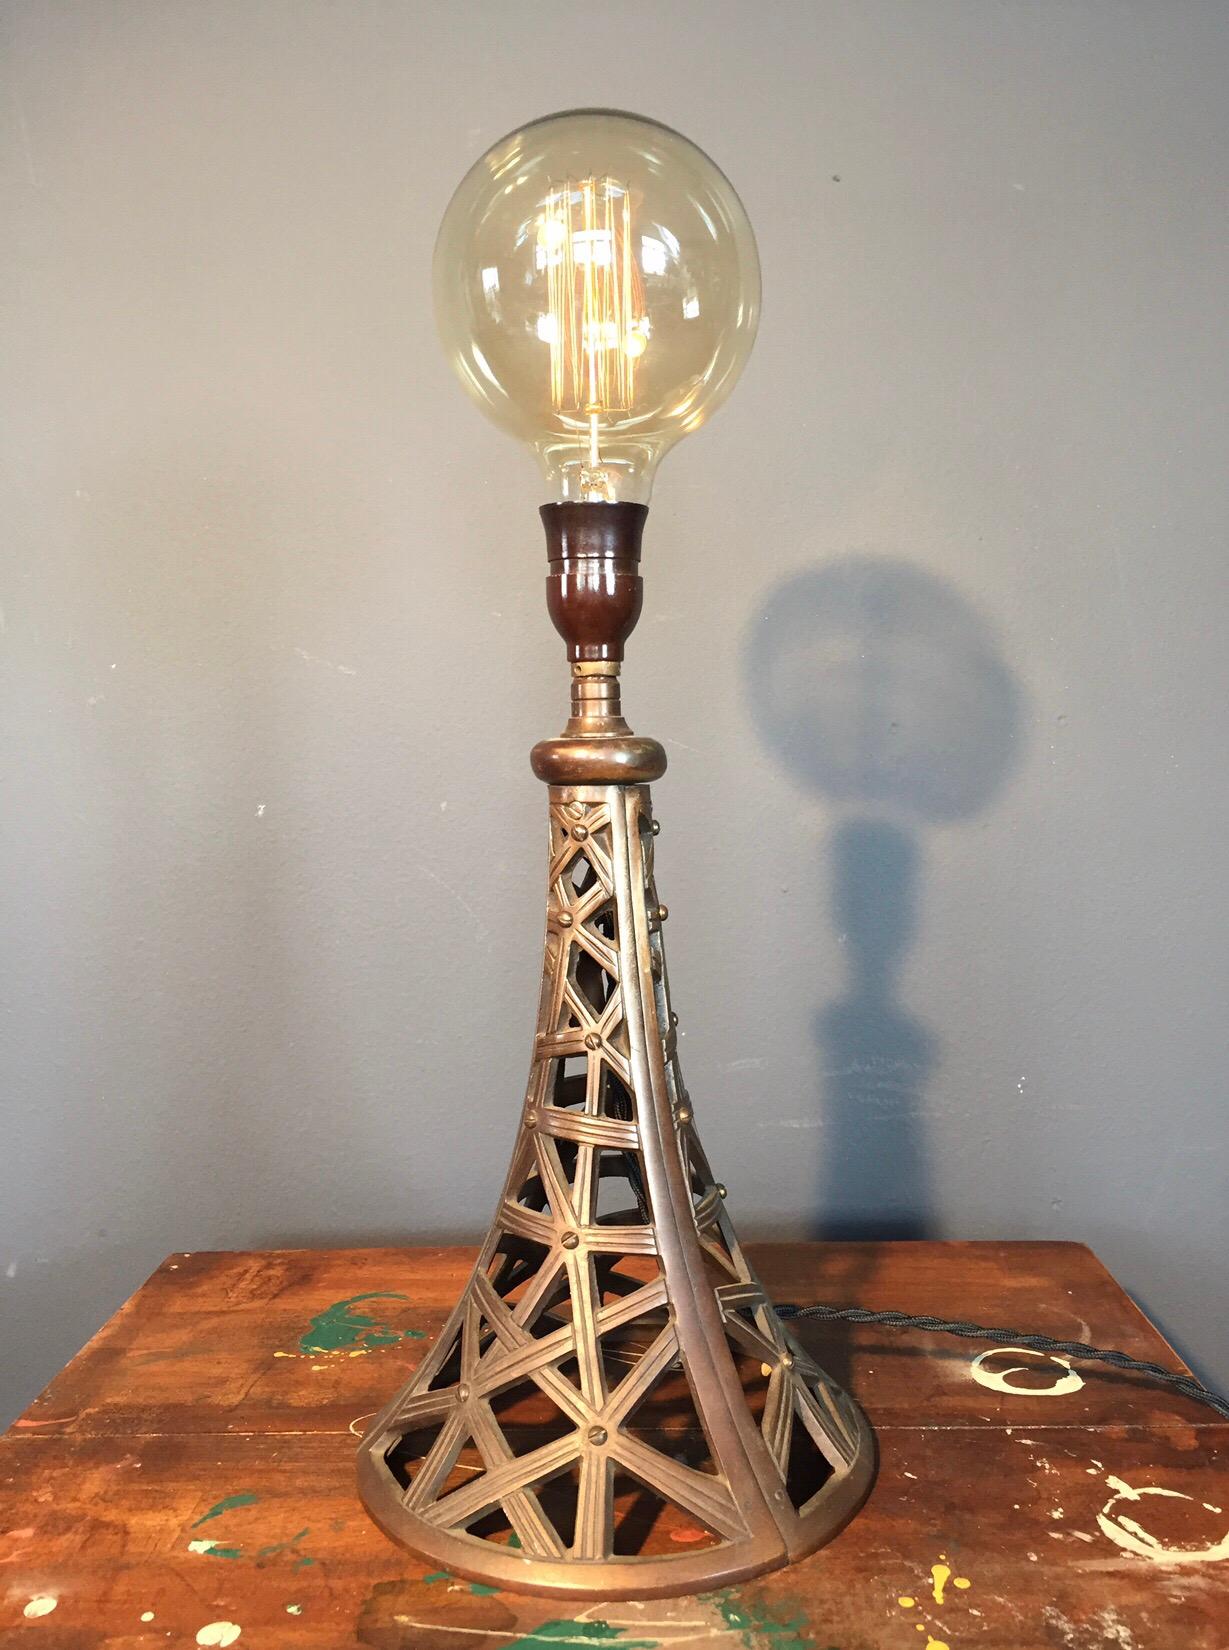 Vintage cast alloy table lamp with a strong maritime/Brutalist feel.
Bakelite bulb holder.
Bulb not included.
 